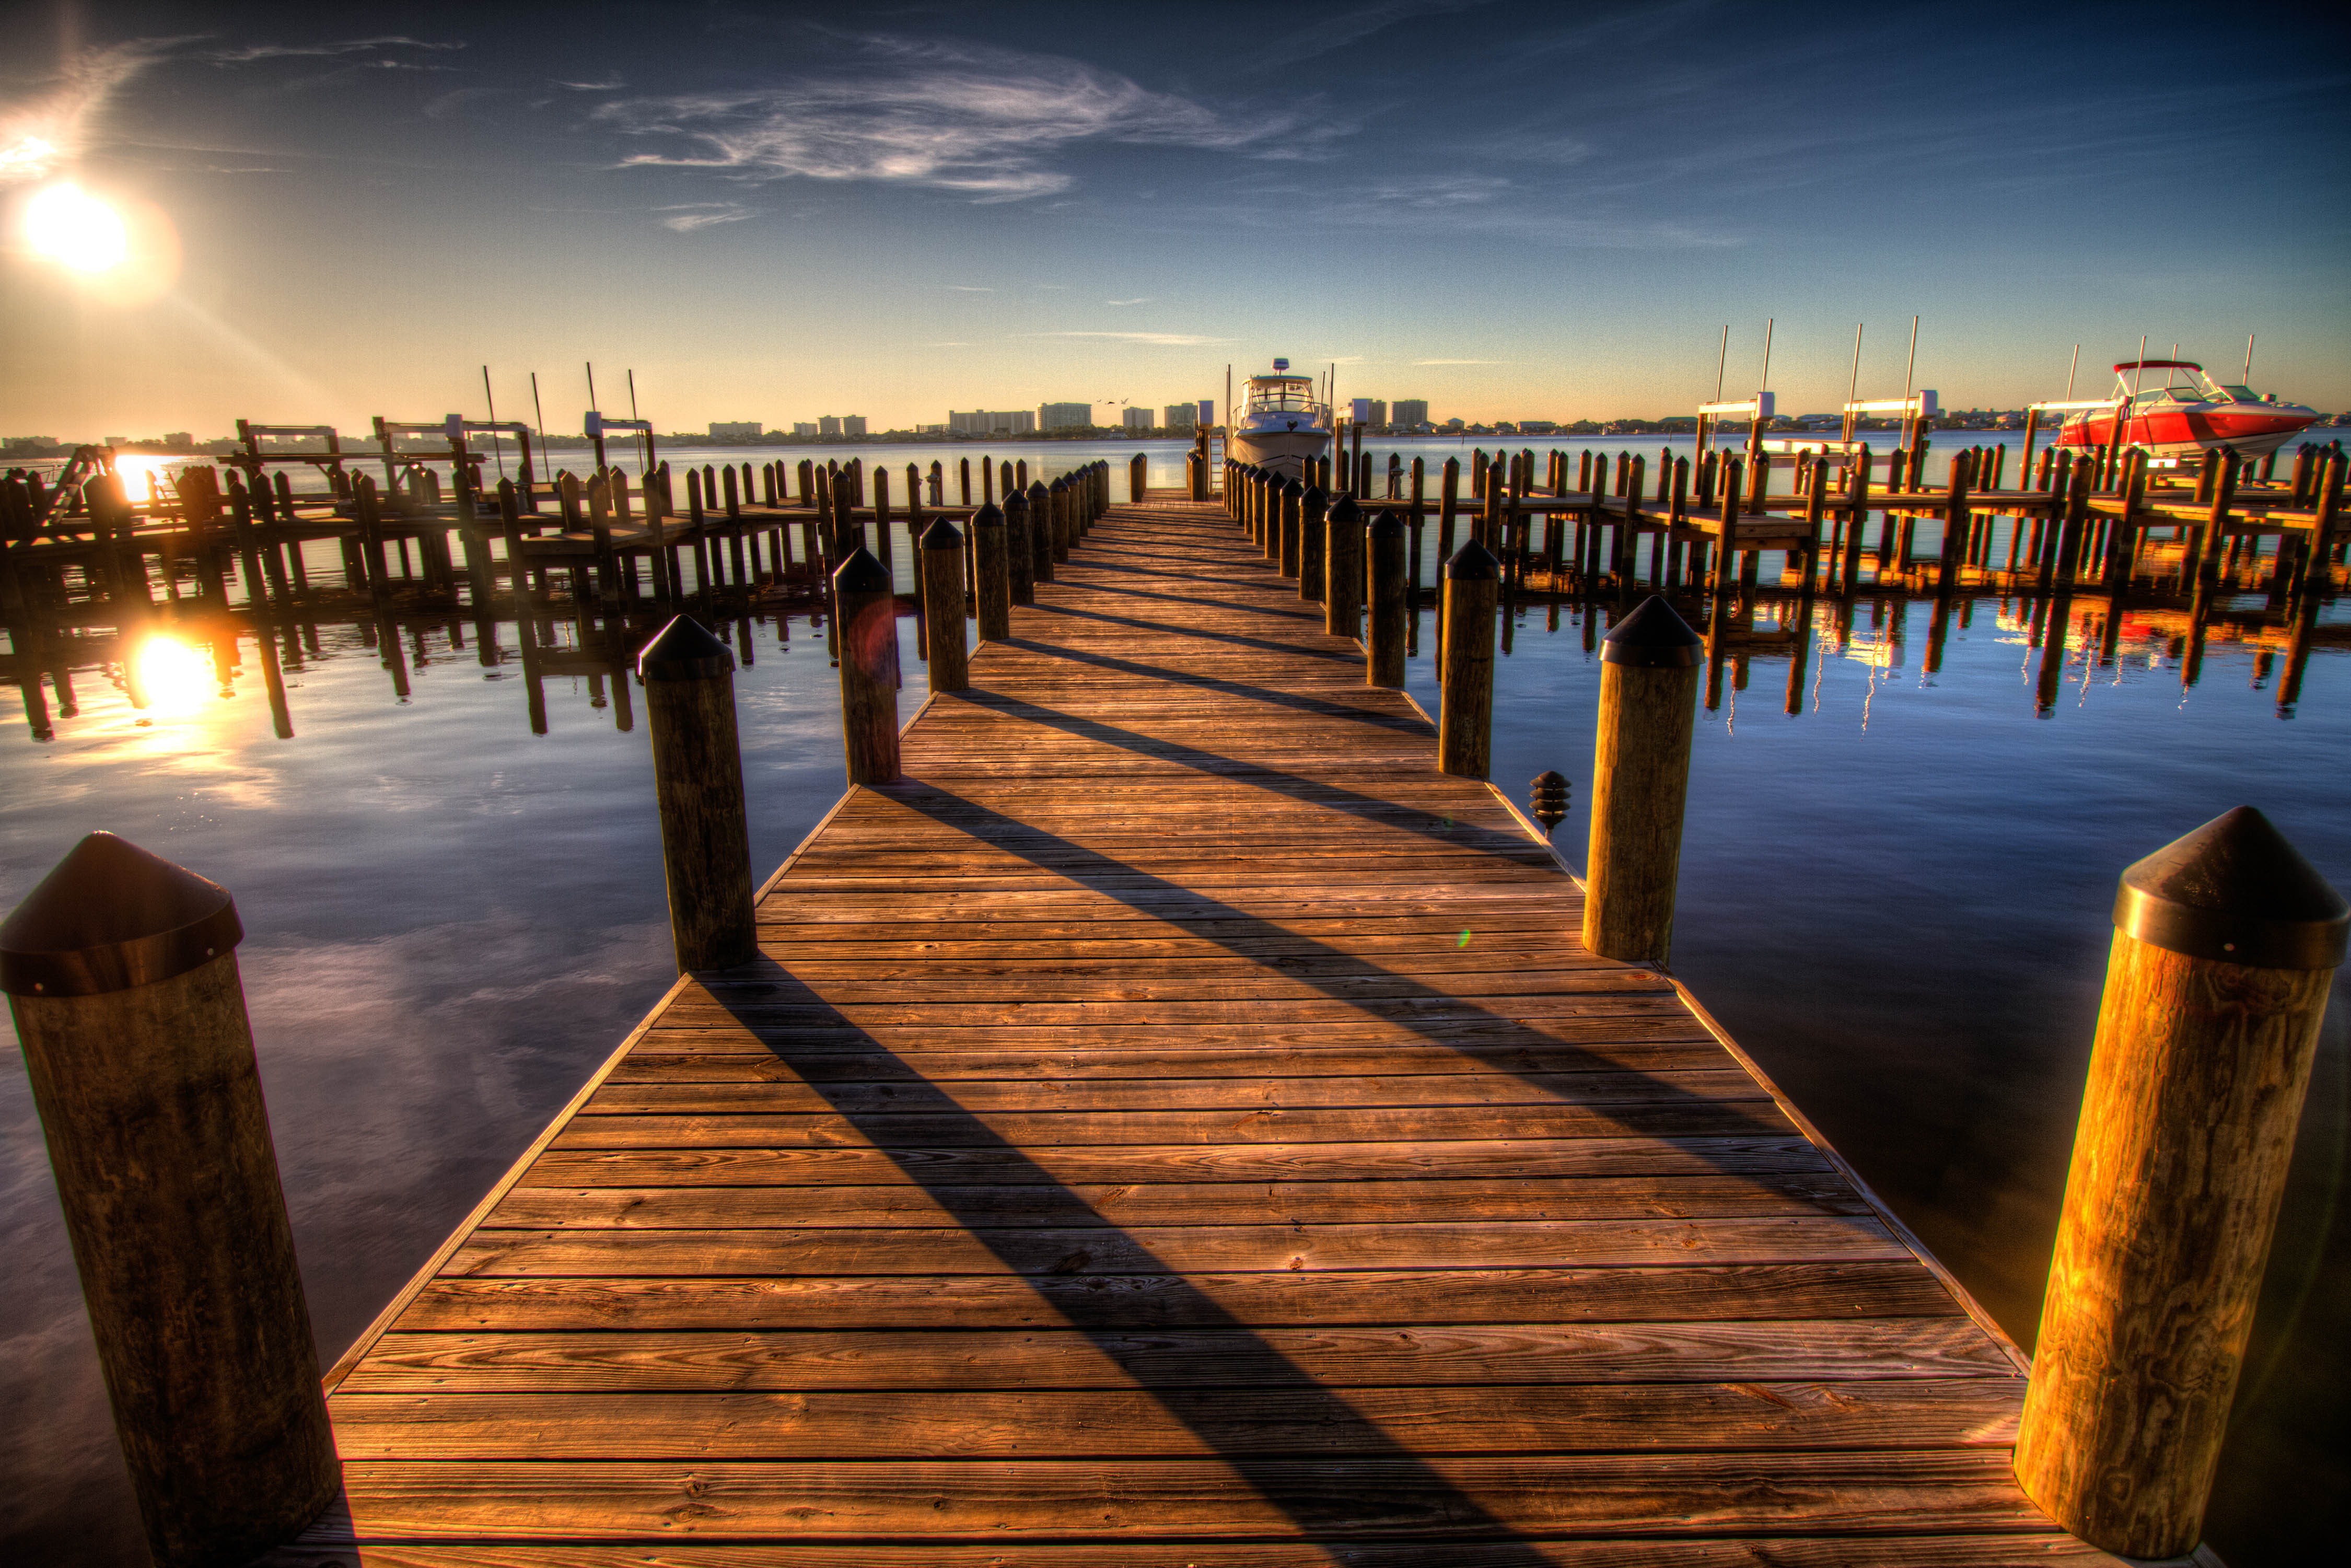 Walking along the wooden pier at sunset